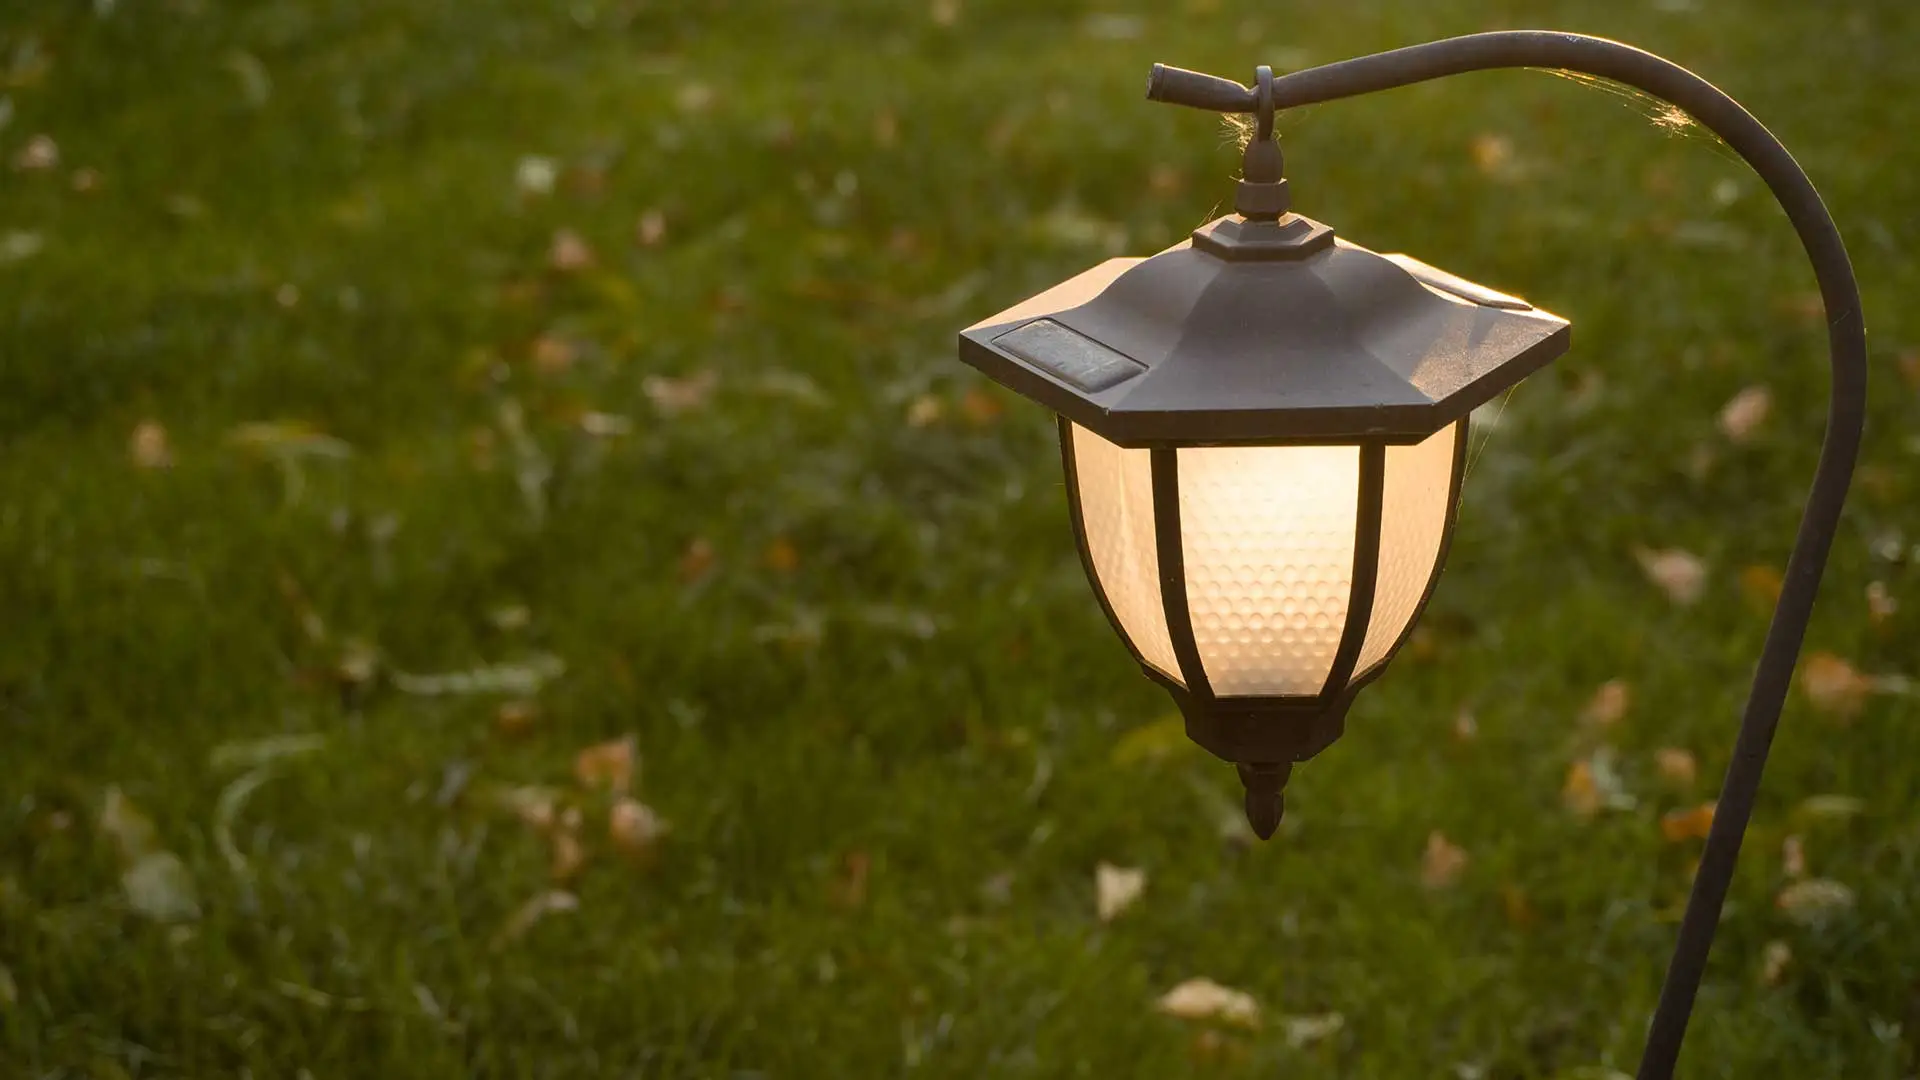 An outdoor light in Columbia, IL.